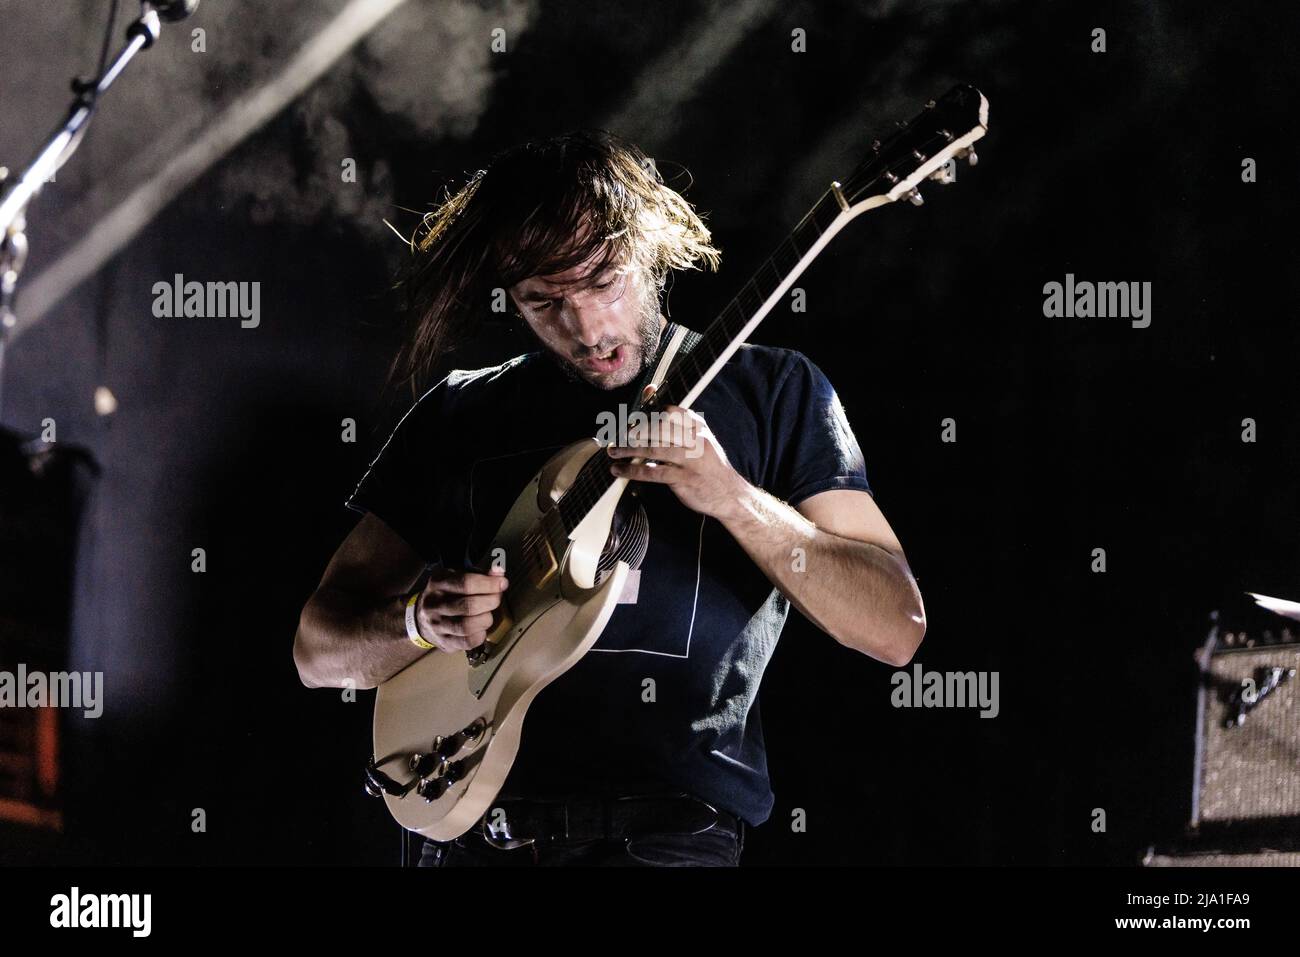 Tilburg, Netherlands. 21st, April 2022. The French heavy-psych rock band  Slift performs a live concert during the Dutch music festival Roadburn  Festival 2022 in Tilburg. Here guitarist Jean Fossat is seen live